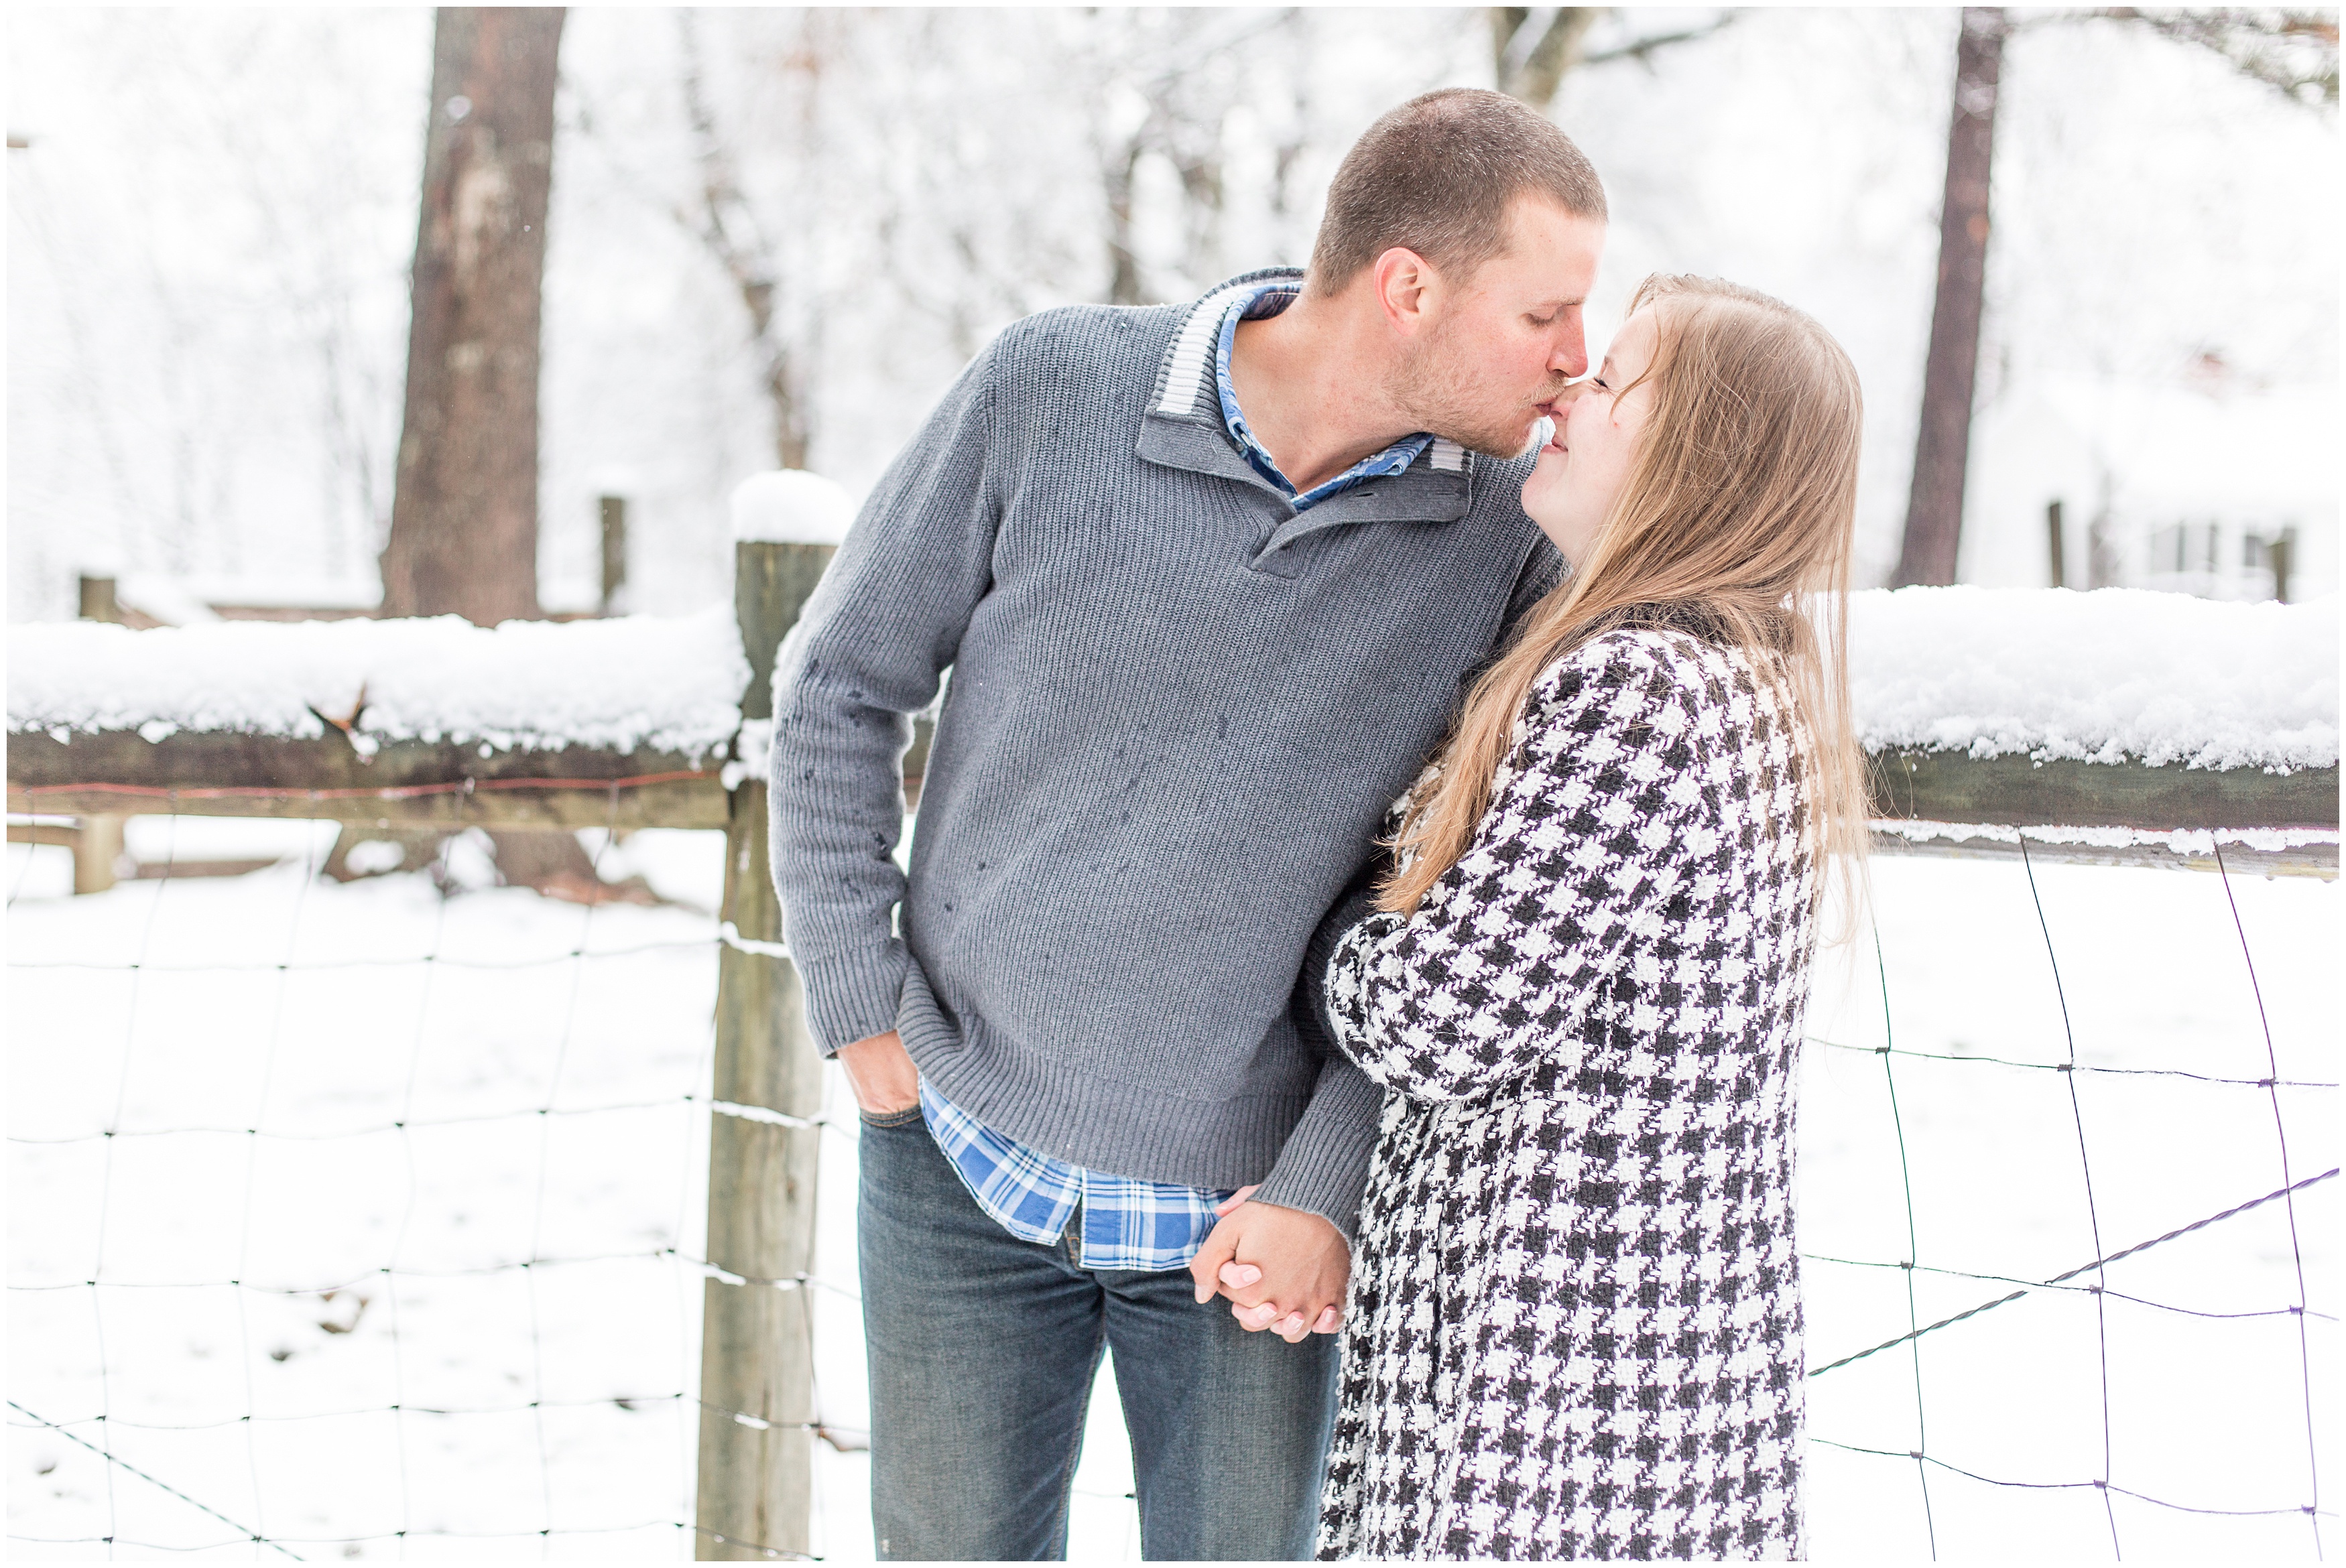 GA couple kiss during Engagement session